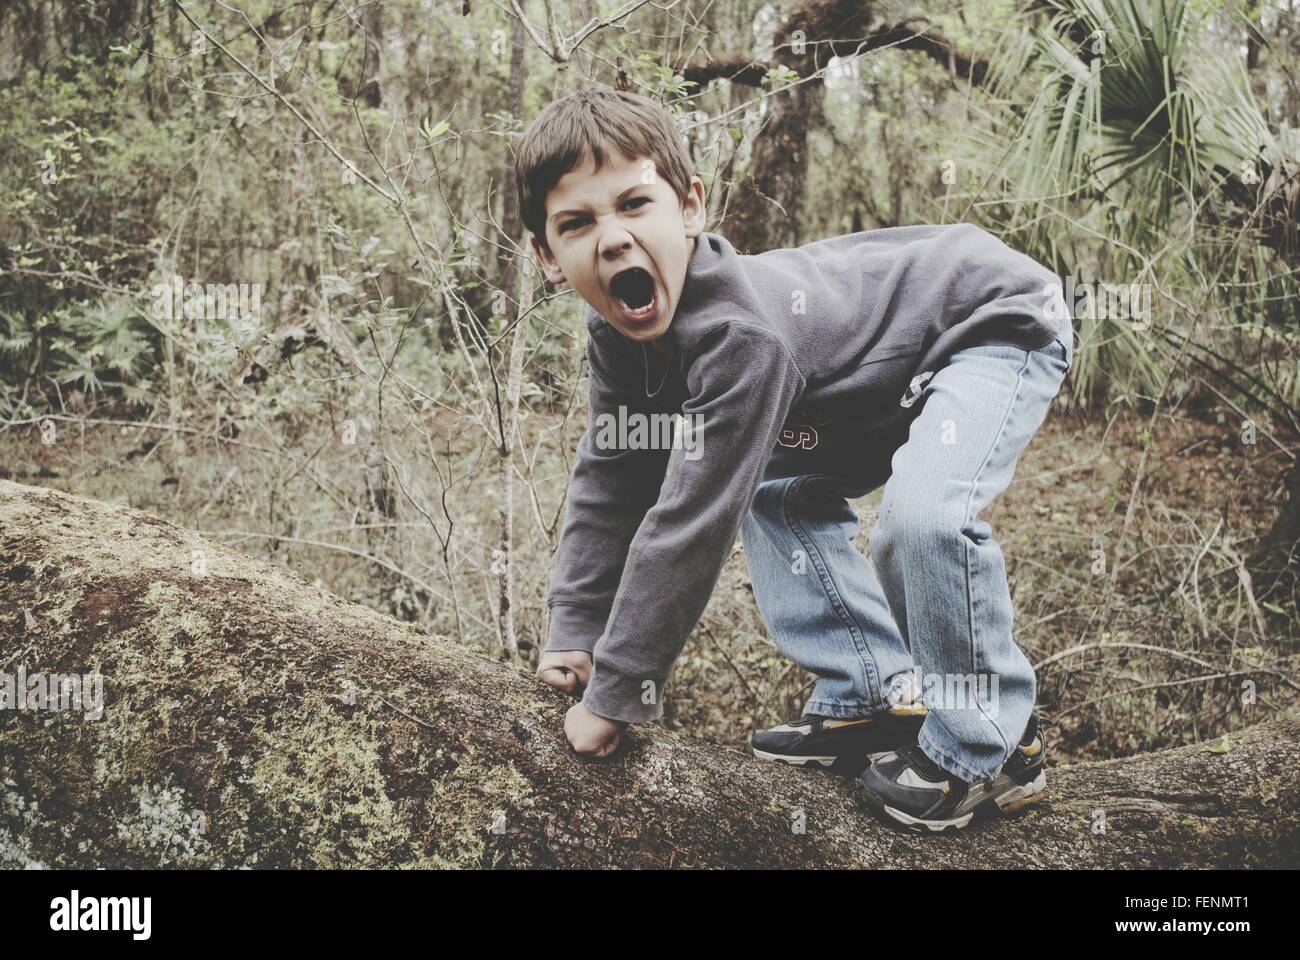 Full Length Side View Of Boy Imitating Gorilla In Forest Stock Photo